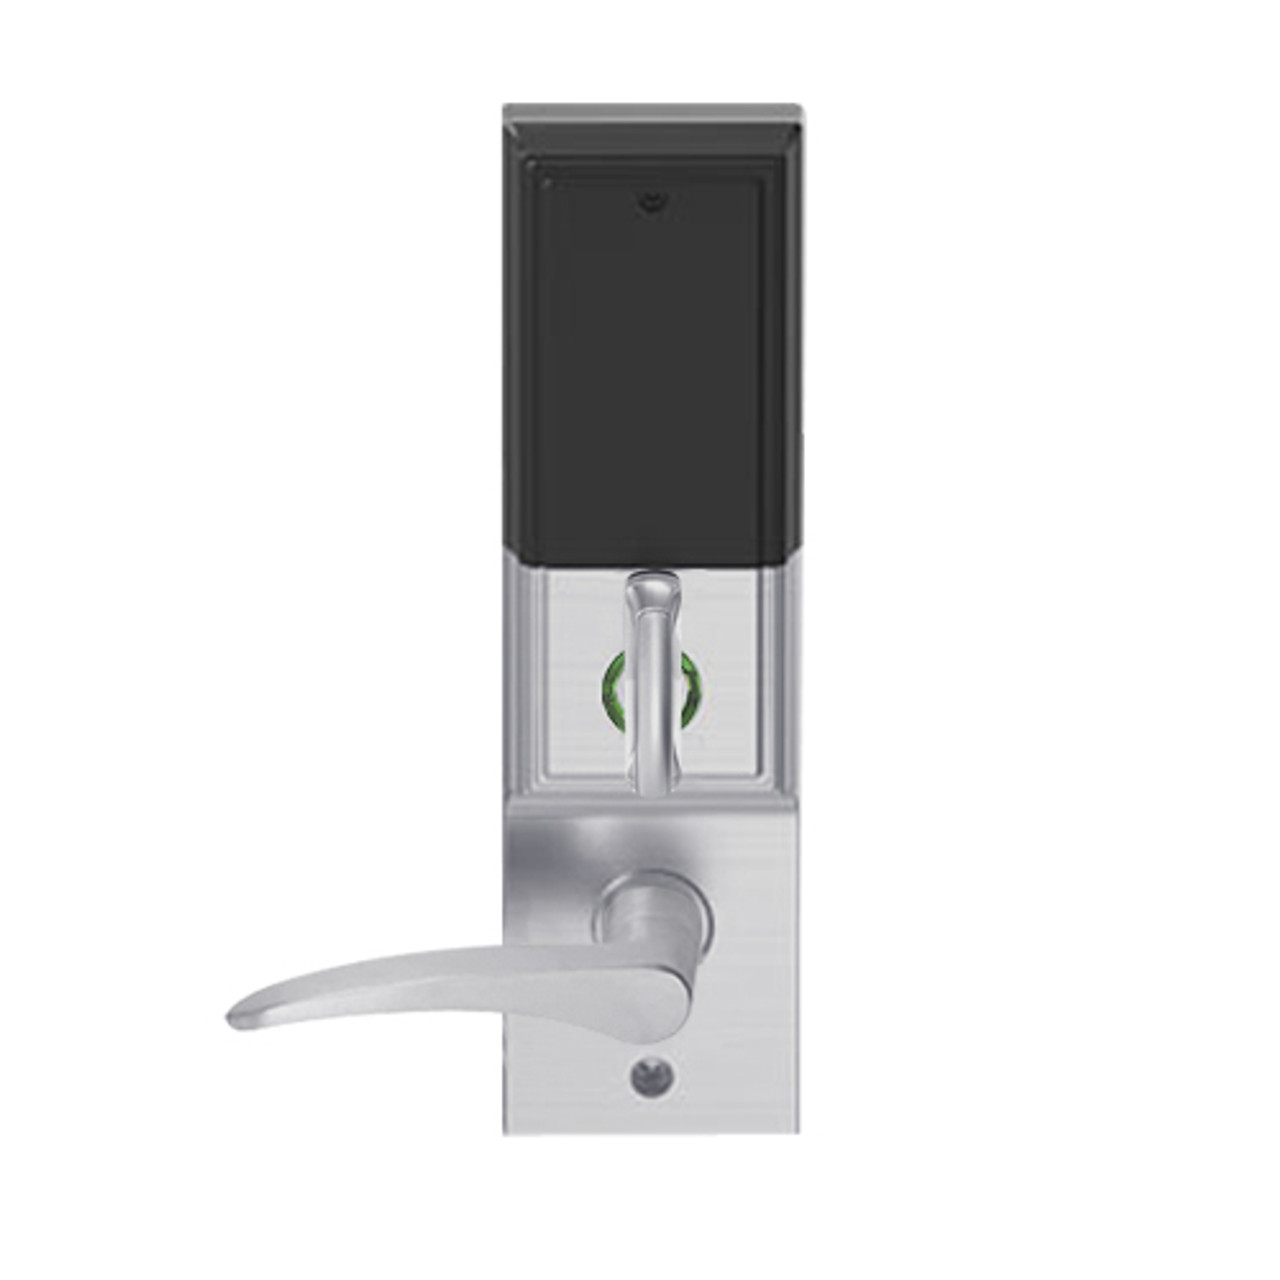 LEMD-ADD-P-12-626-RH Schlage Privacy/Apartment Wireless Addison Mortise Deadbolt Lock with LED and 12 Lever in Satin Chrome